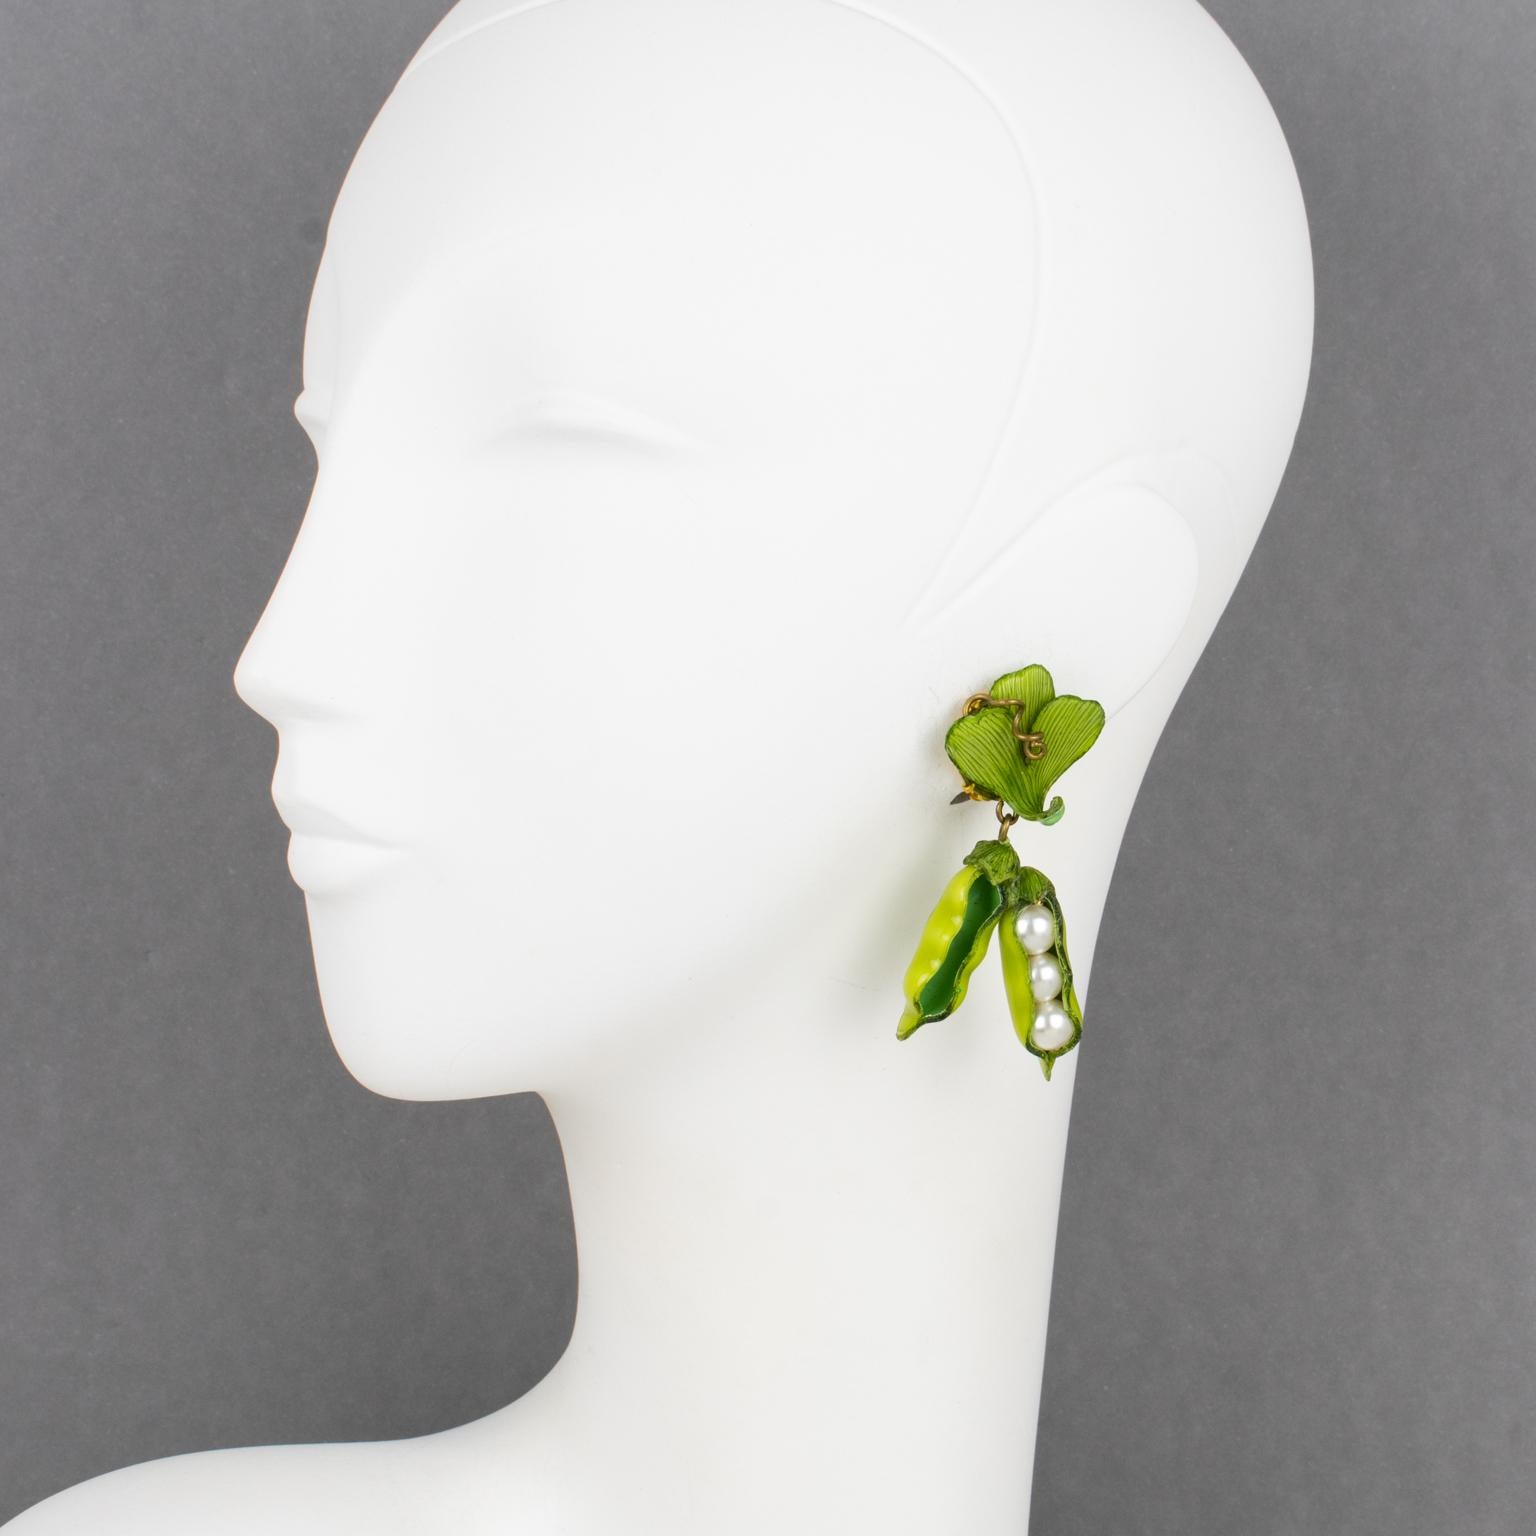 Cilea Paris created these cute, dangling resin clip-on earrings. They feature a dimensional dangle of green peas with pea pods and leaves in a fresh green color. The peas are in pearl-imitation beads. The pieces are marked on the underside with the